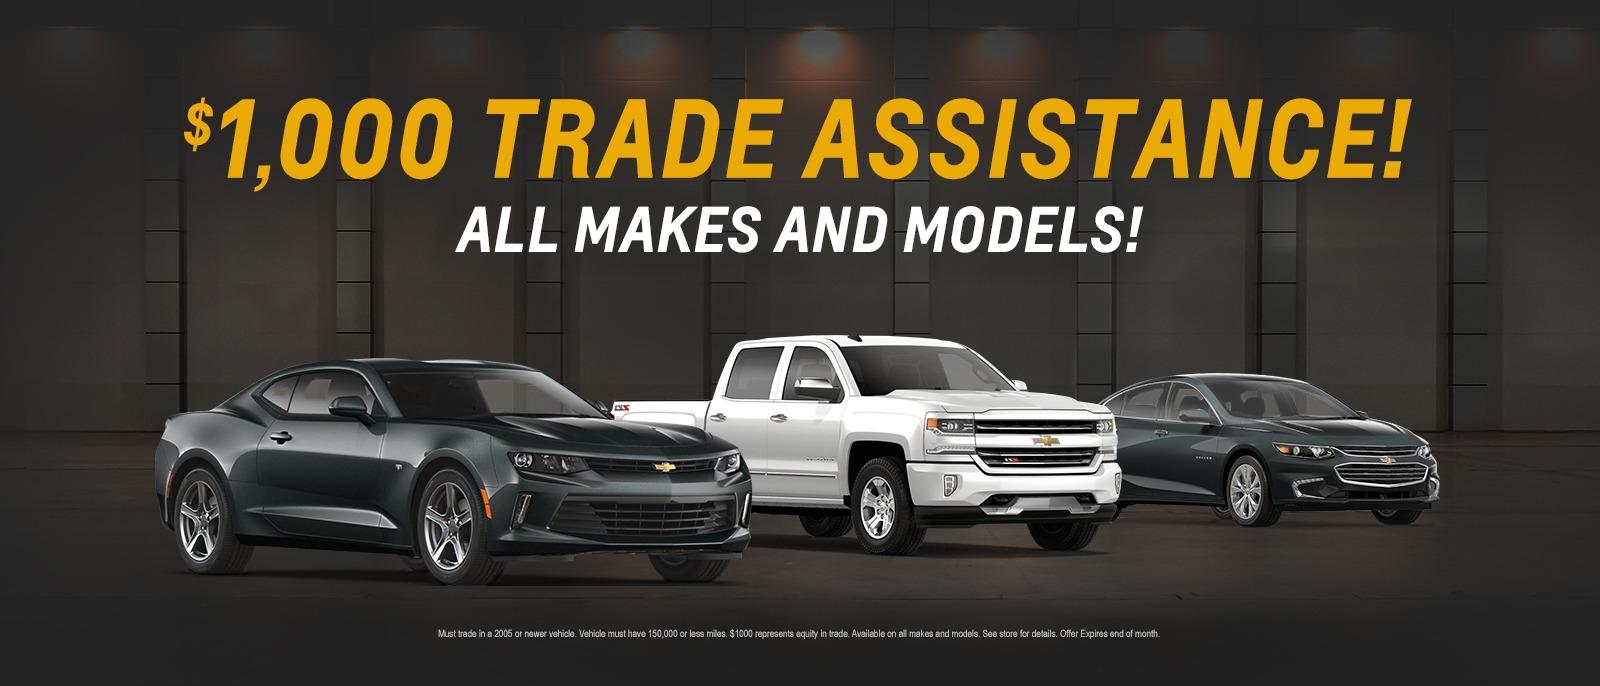 $1,000 Trade Assistance